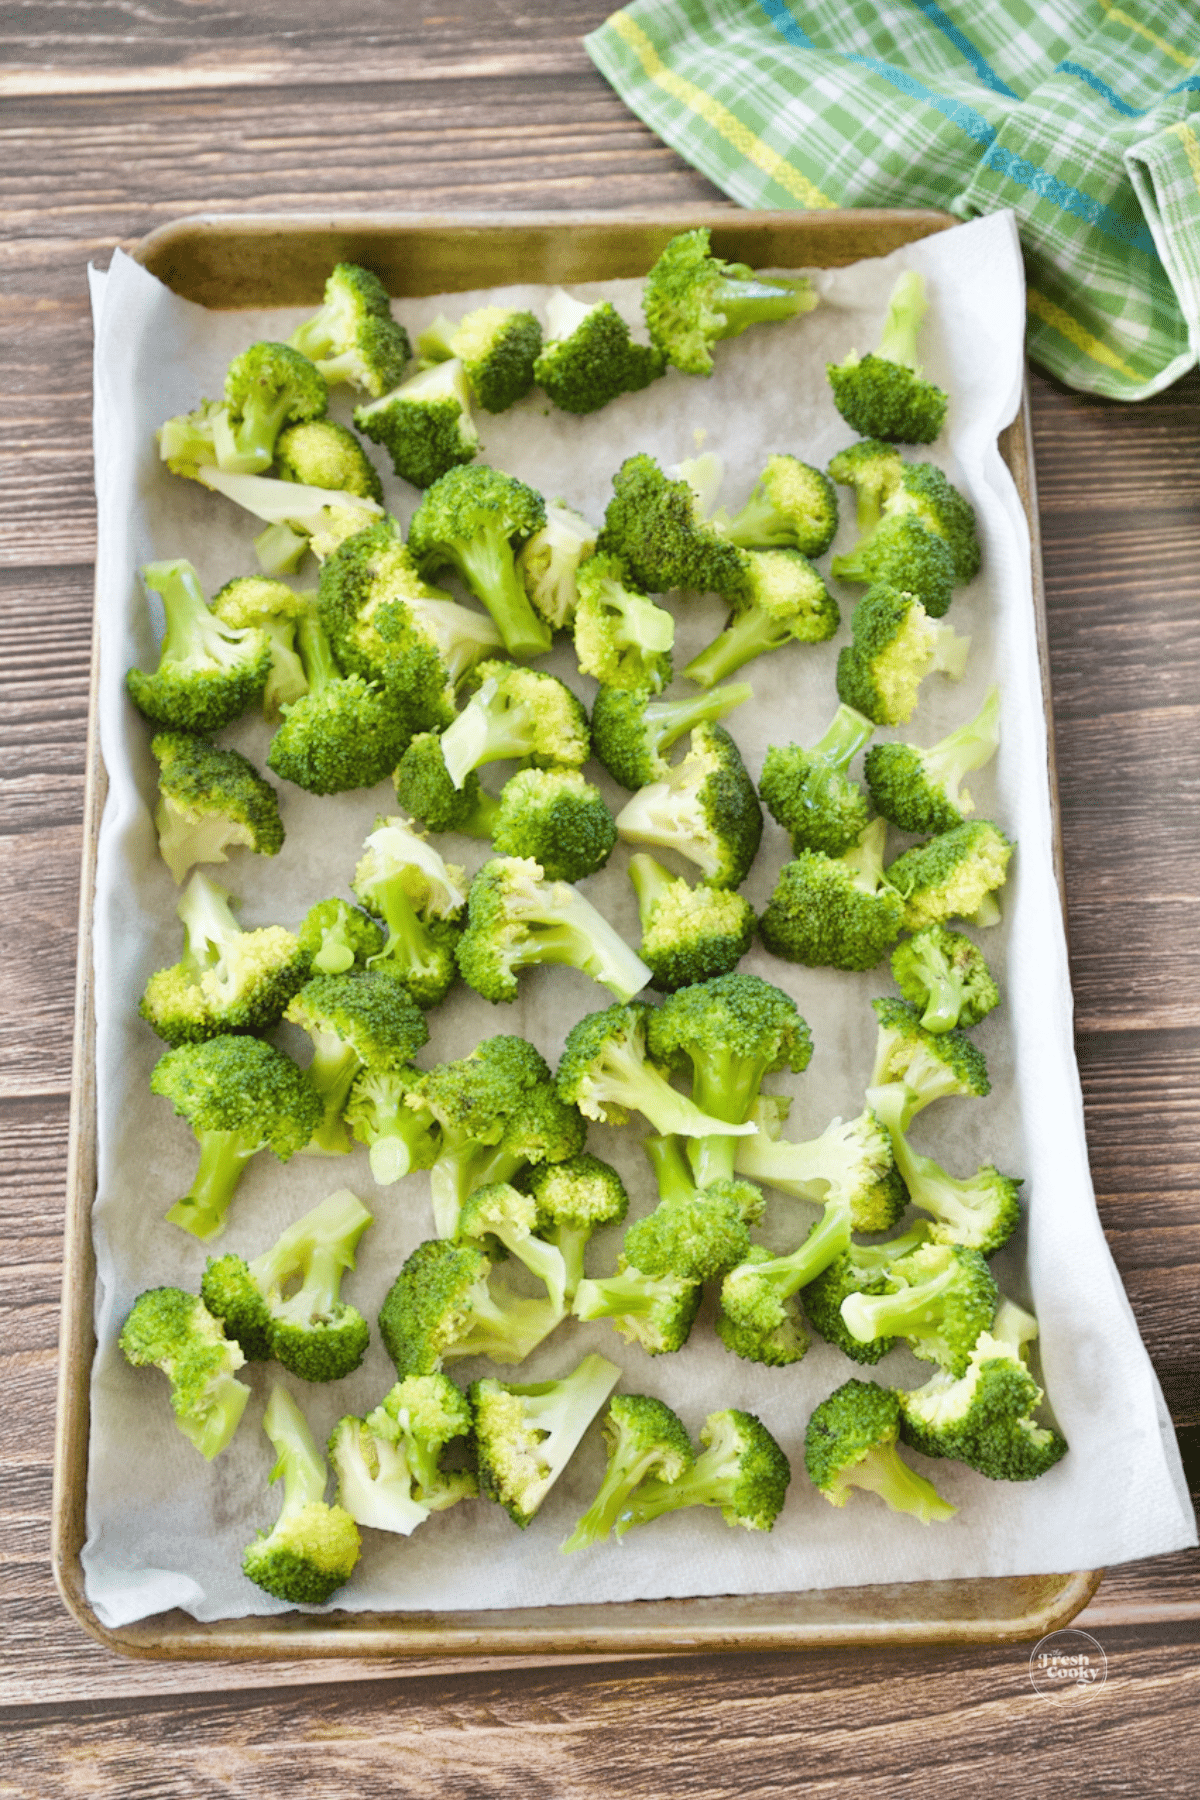 Blanched broccoli in tray with paper towels to absorb water. 